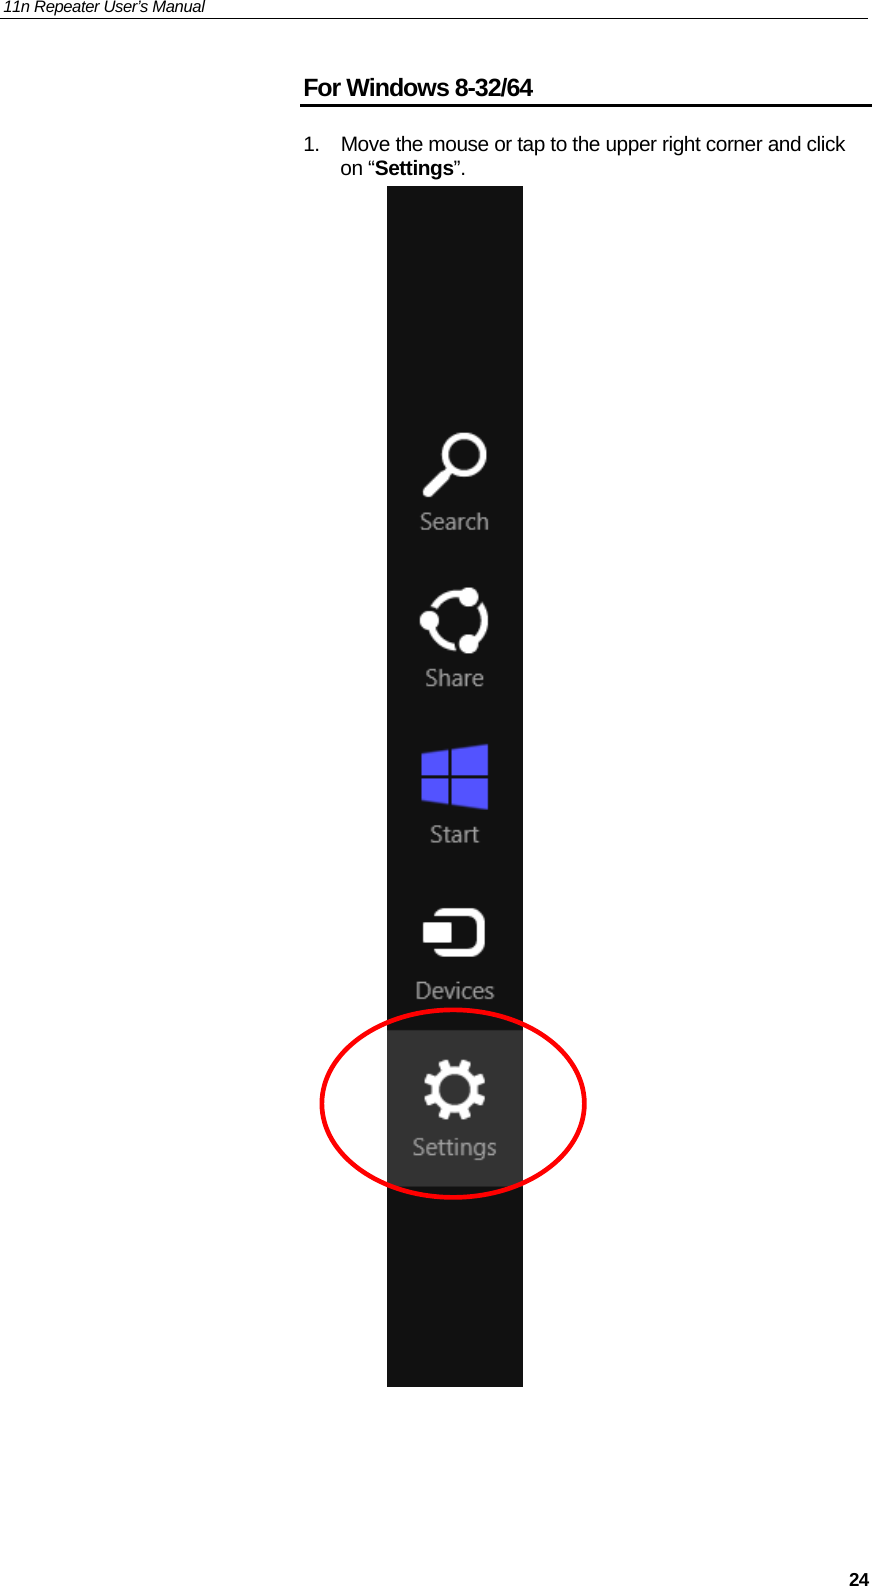 11n Repeater User’s Manual     24For Windows 8-32/64 1.  Move the mouse or tap to the upper right corner and click on “Settings”.     